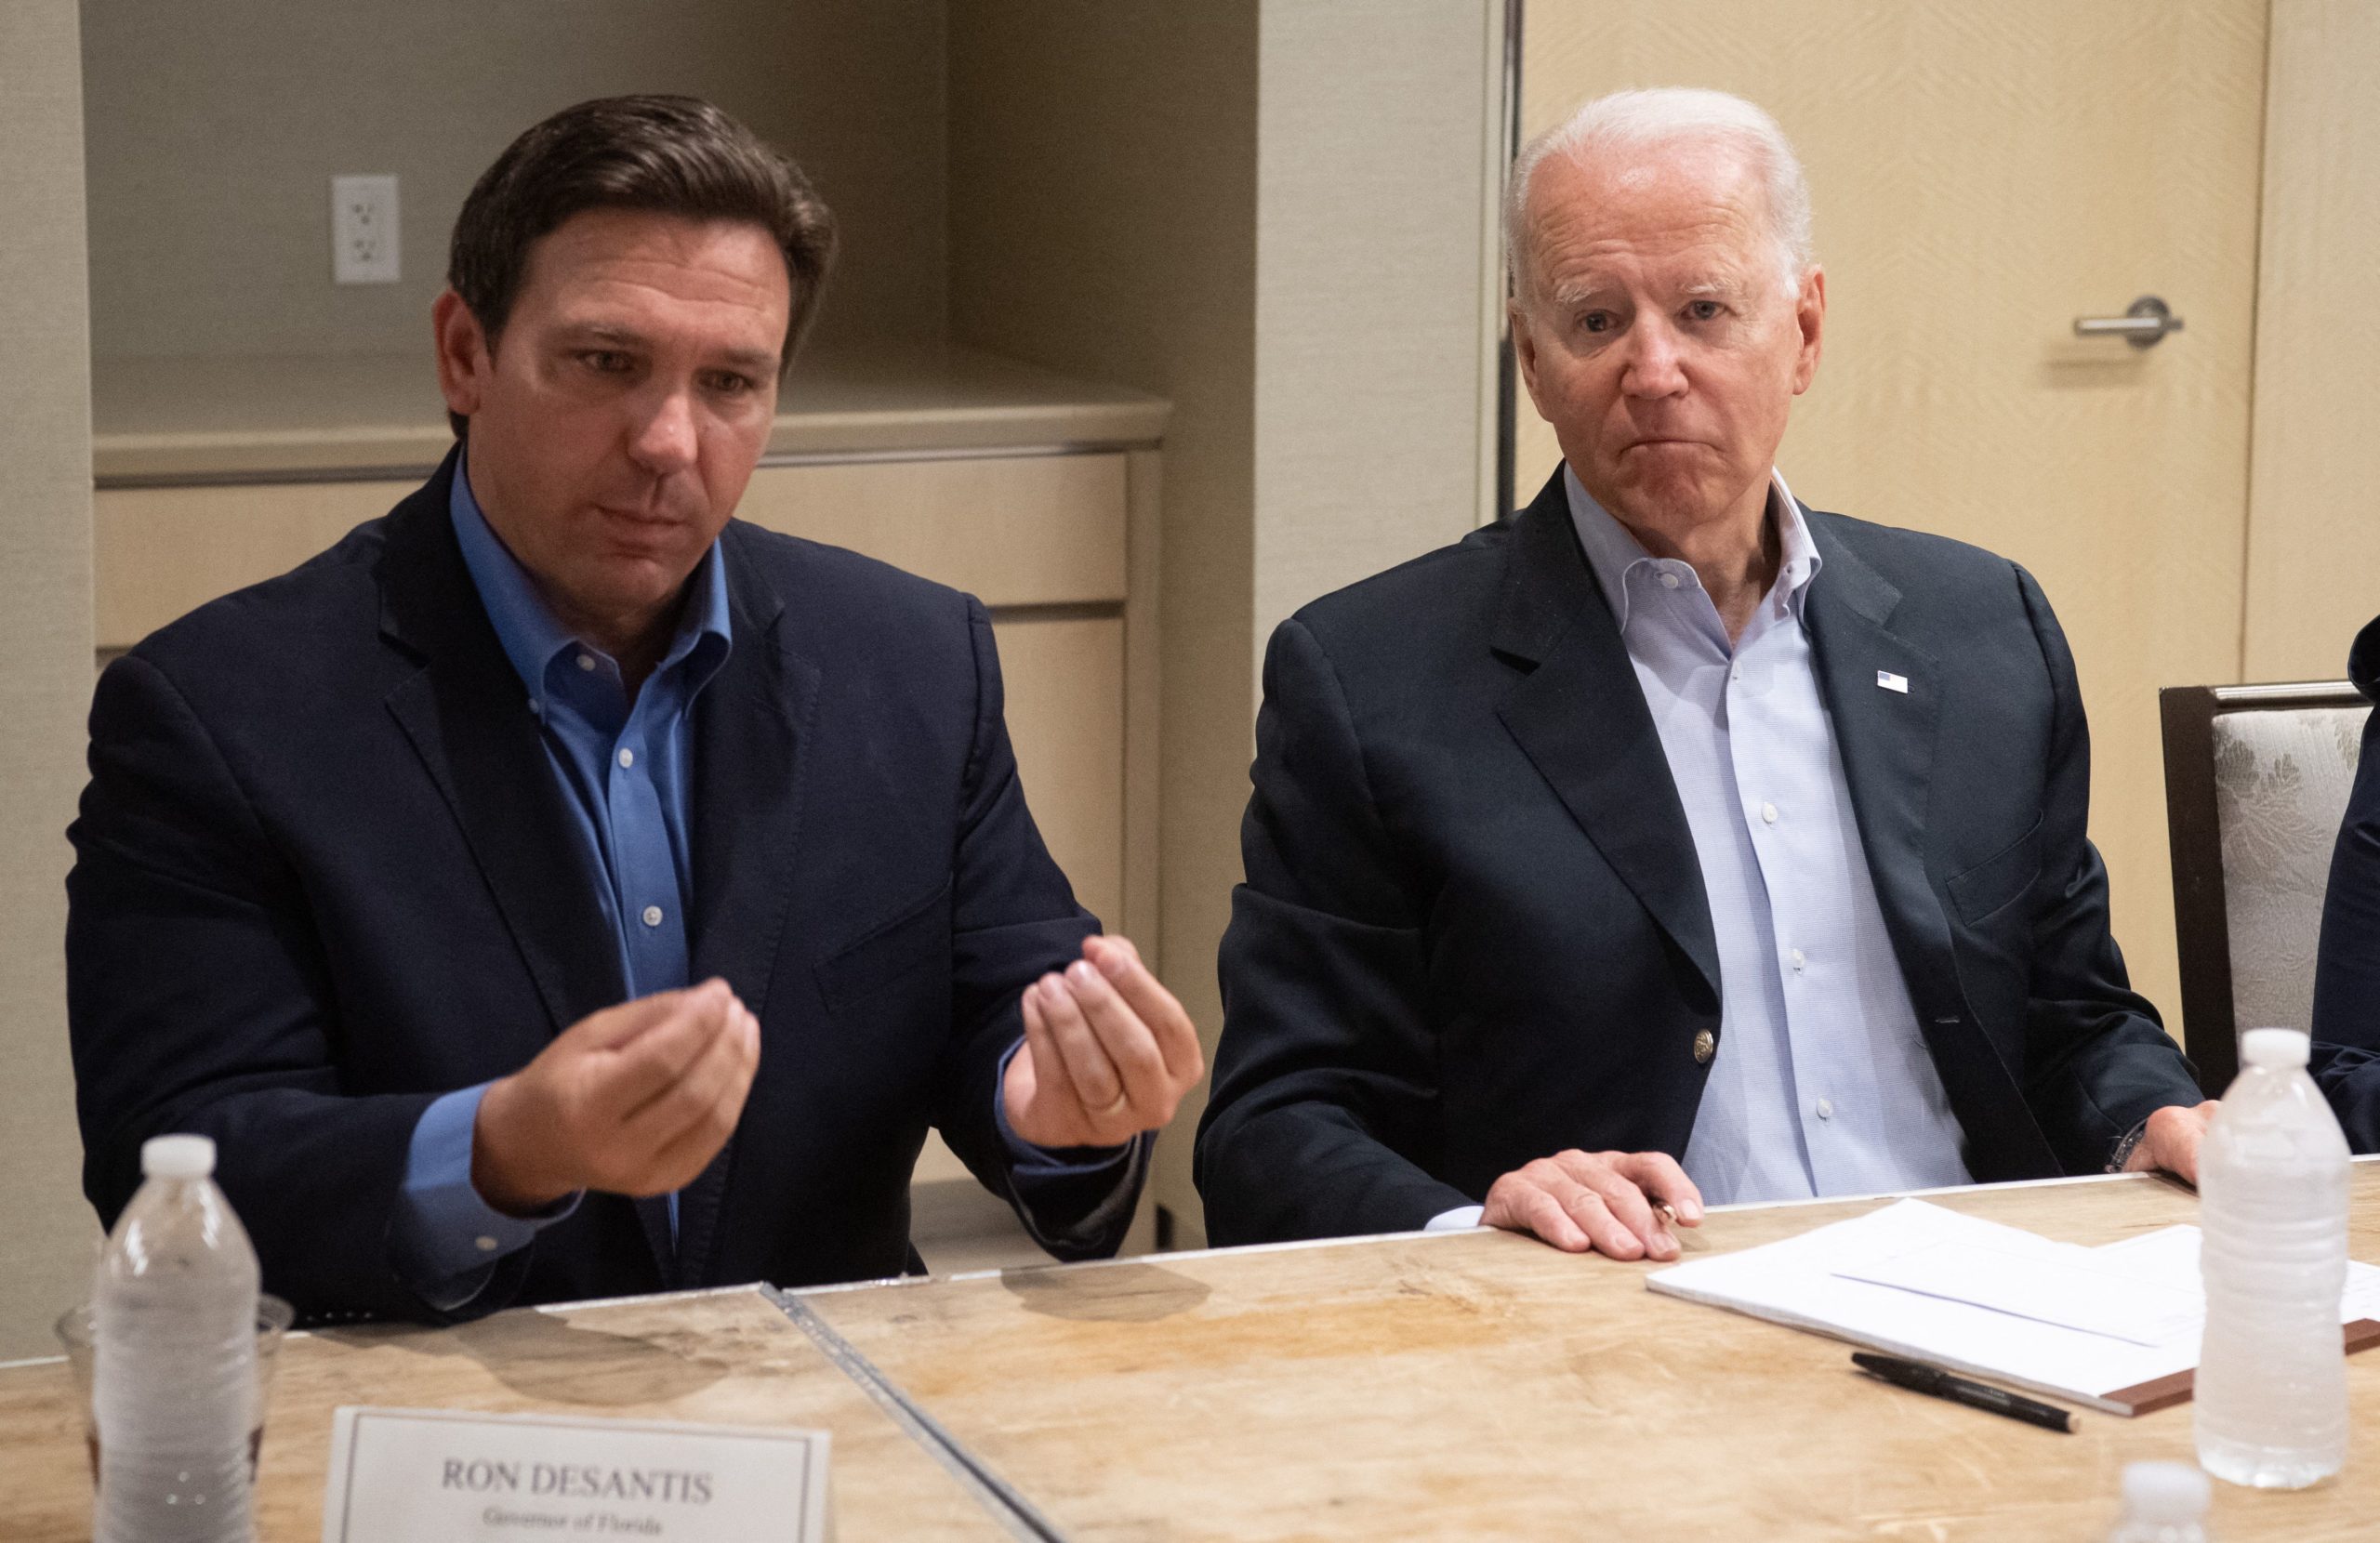 US President Joe Biden alongside Florida Governor Ron DeSantis (L) speaks about the collapse of the 12-story Champlain Towers South condo building in Surfside, during a briefing in Miami Beach, Florida, July 1, 2021. (Photo by SAUL LOEB / AFP) (Photo by SAUL LOEB/AFP via Getty Images)